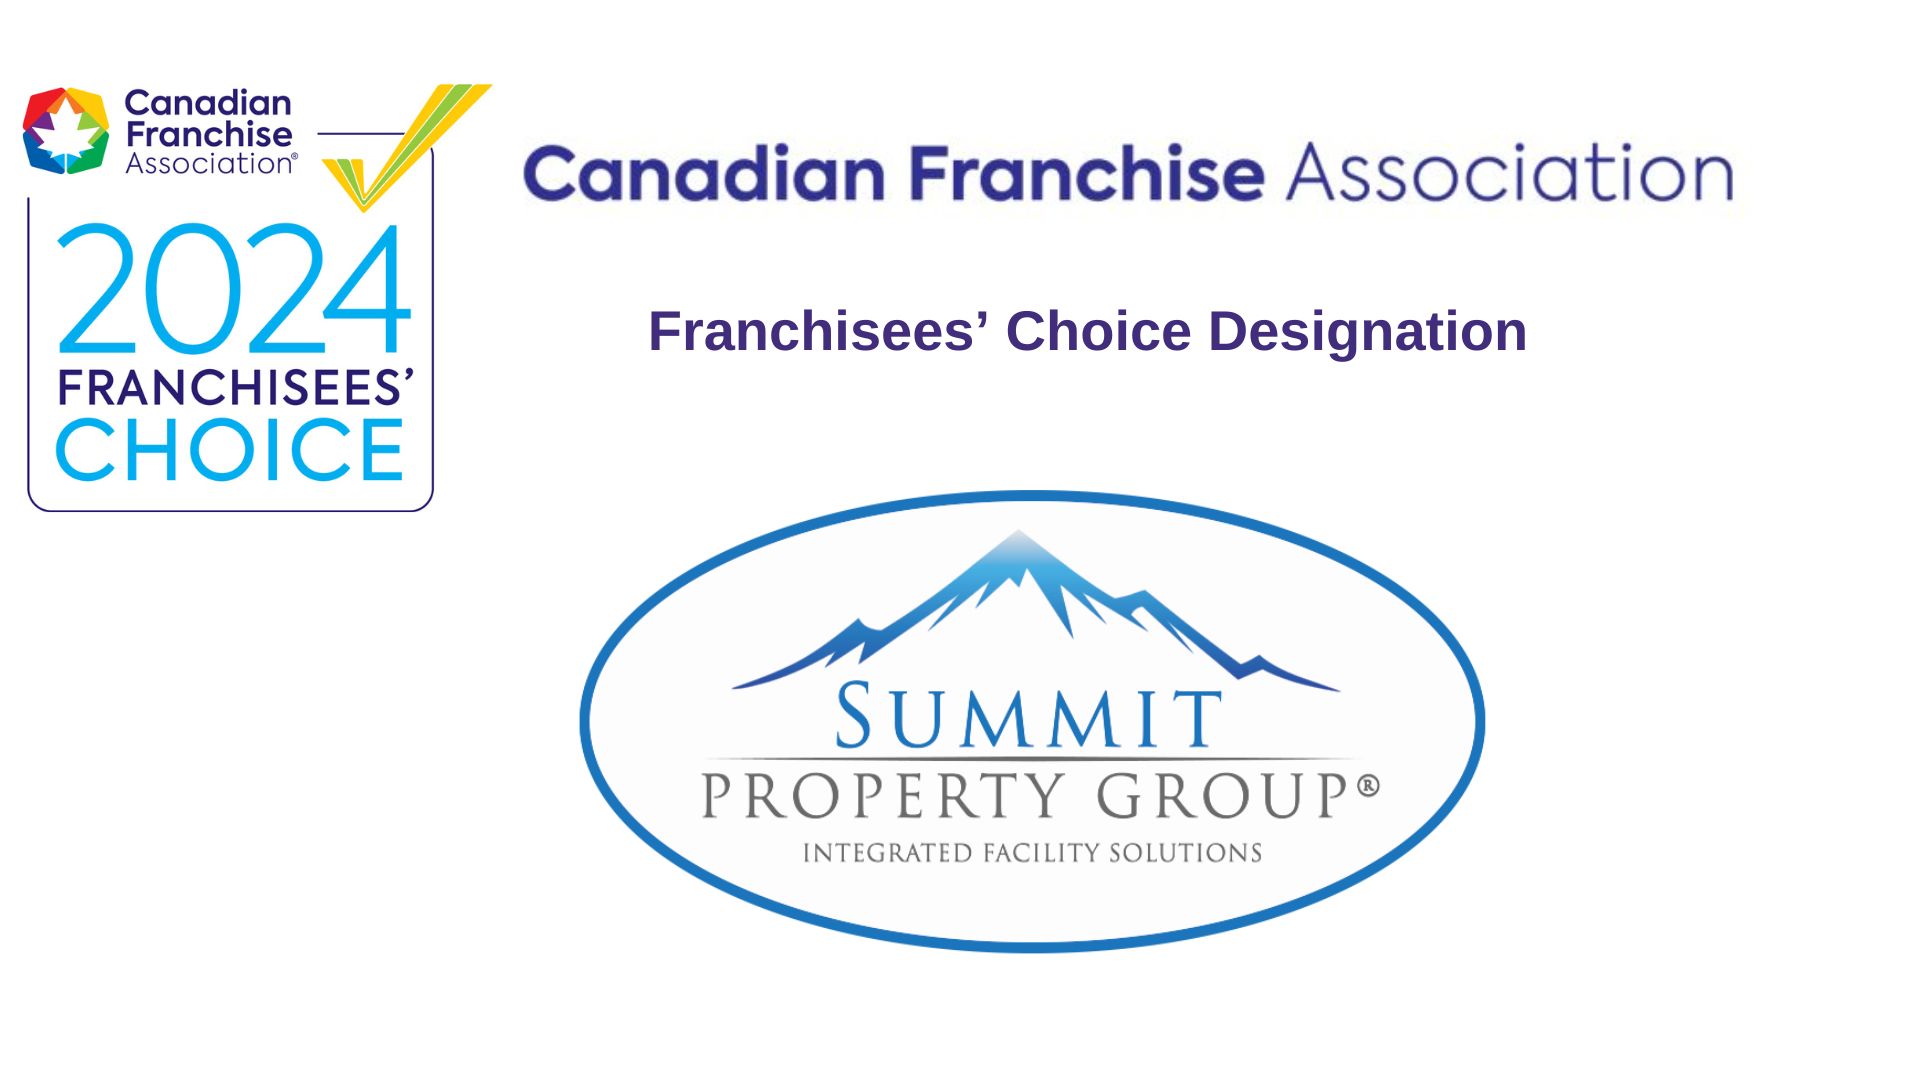 Summit Property Group Receives Franchisees’ Choice Designation